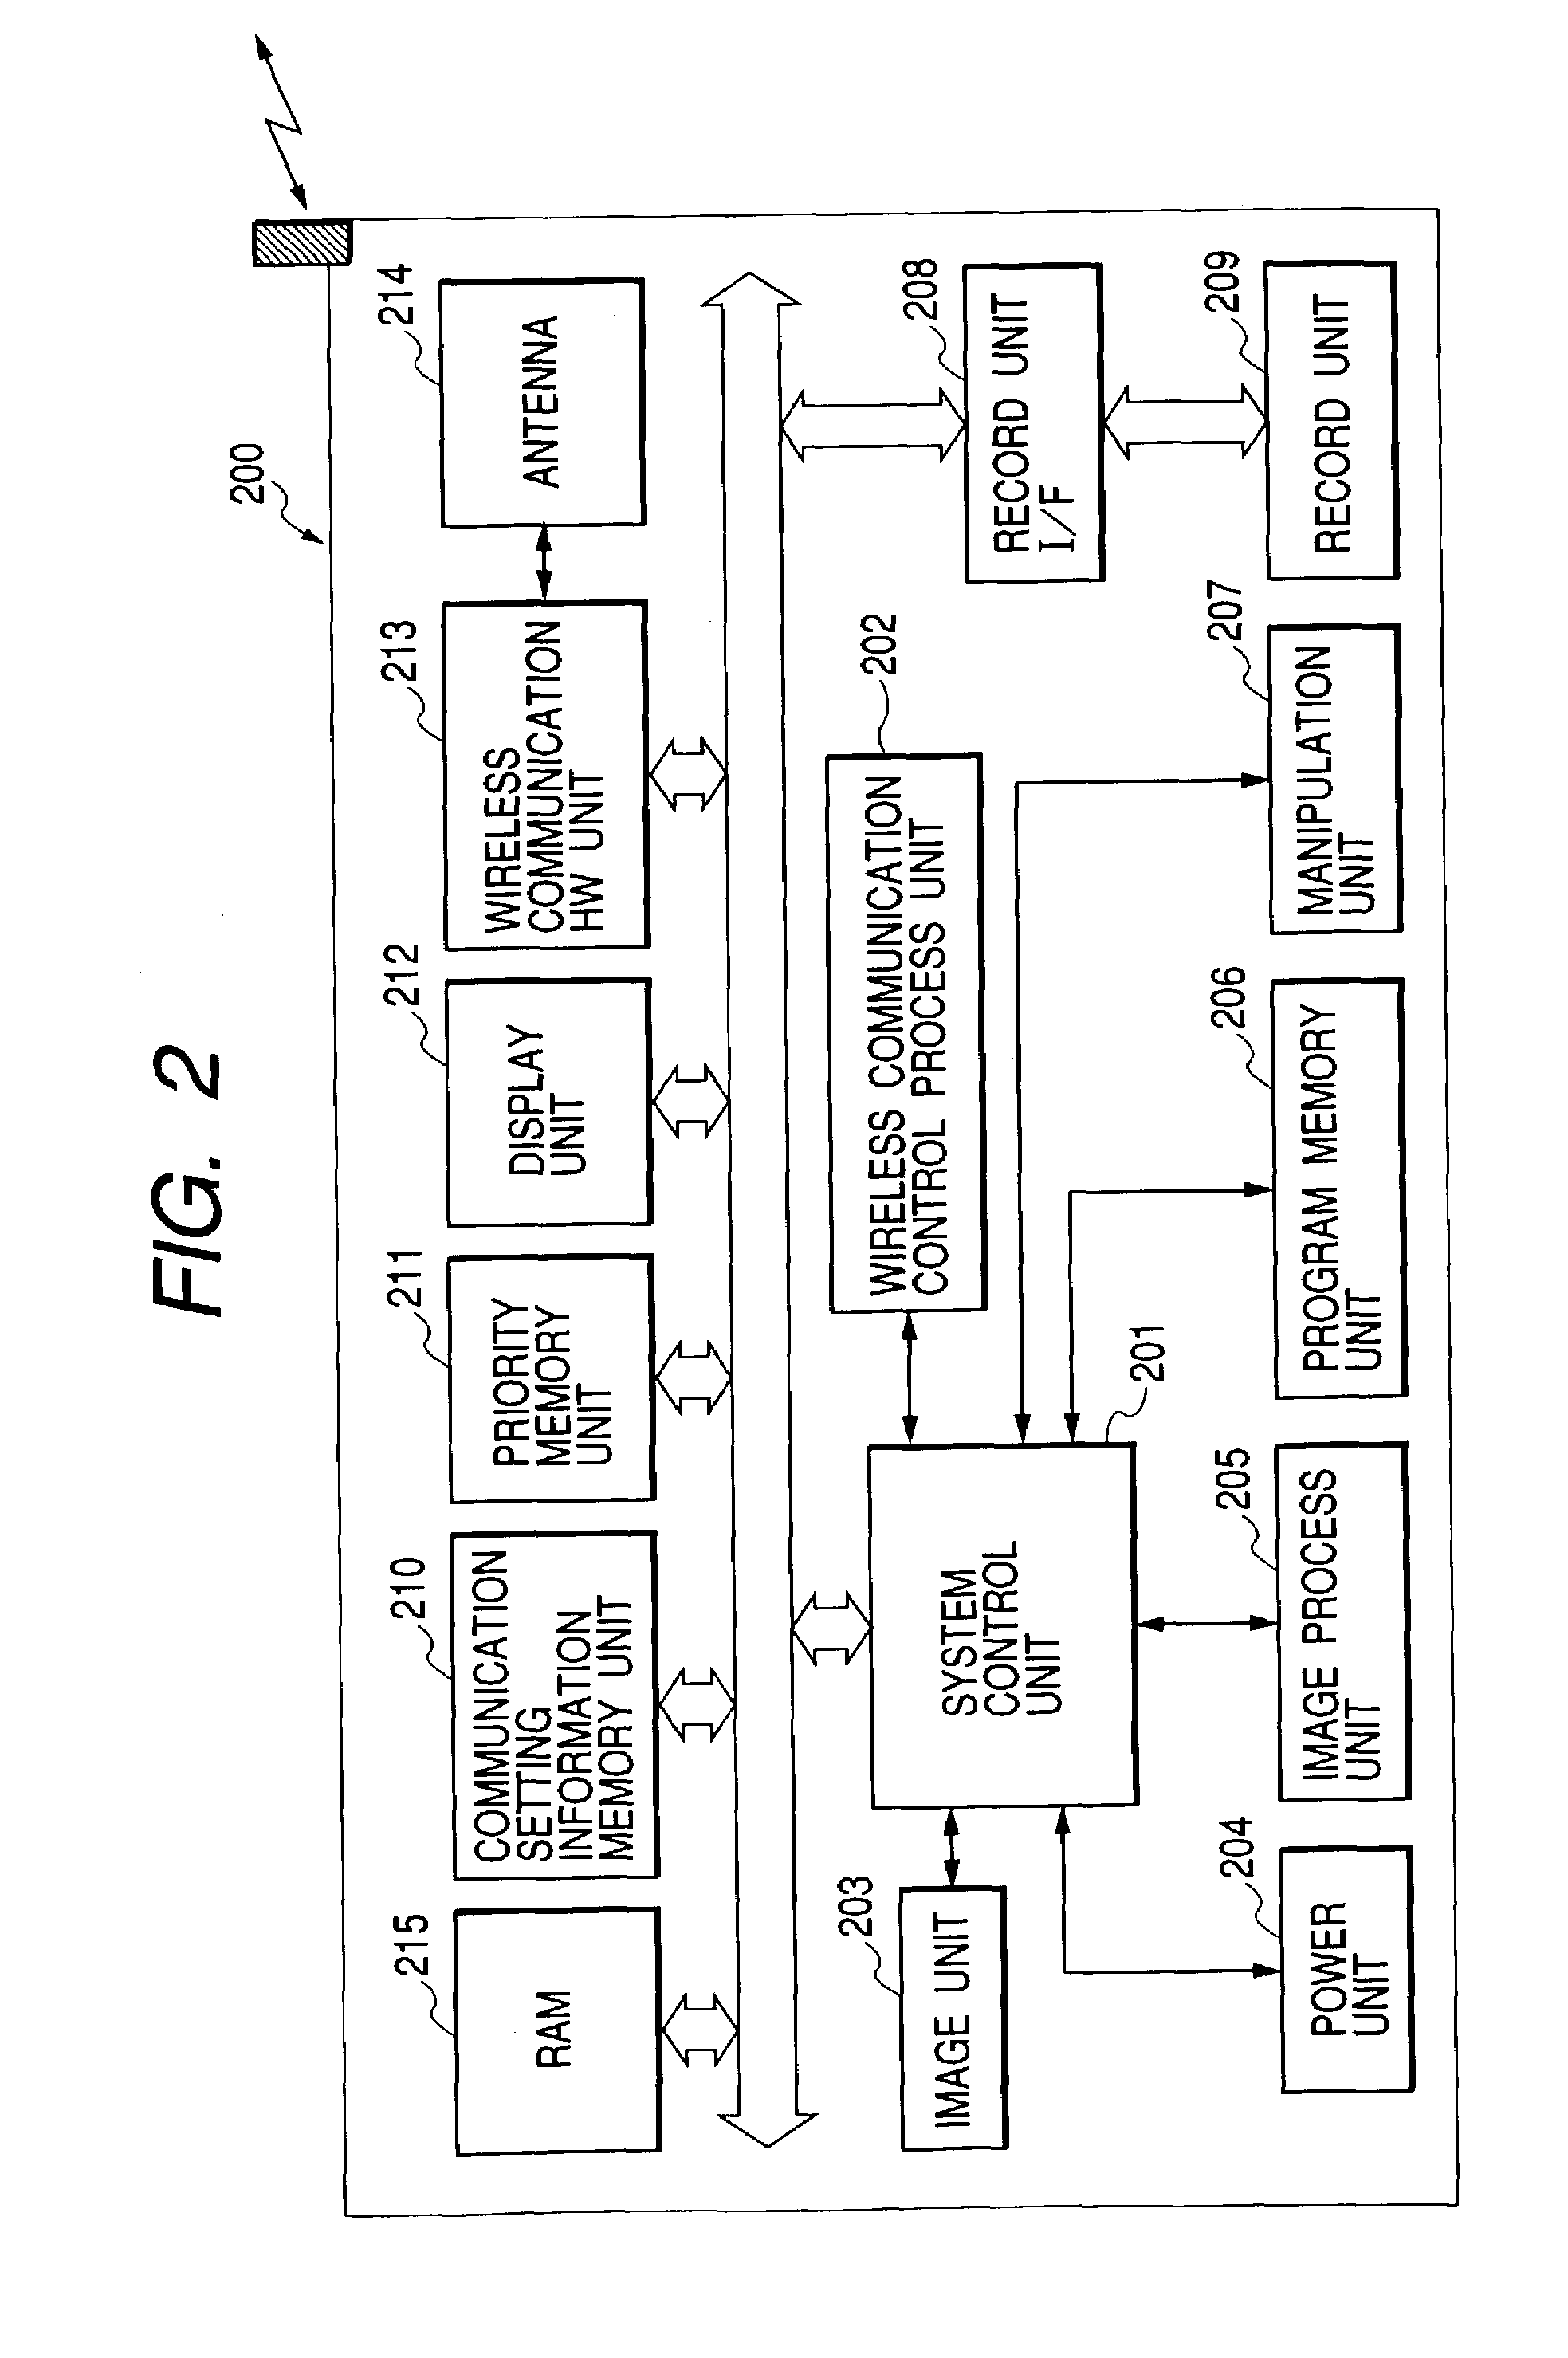 Method for performing a wireless communication by a wireless communication apparatus with an access point and establishing a connection with a network through the access point